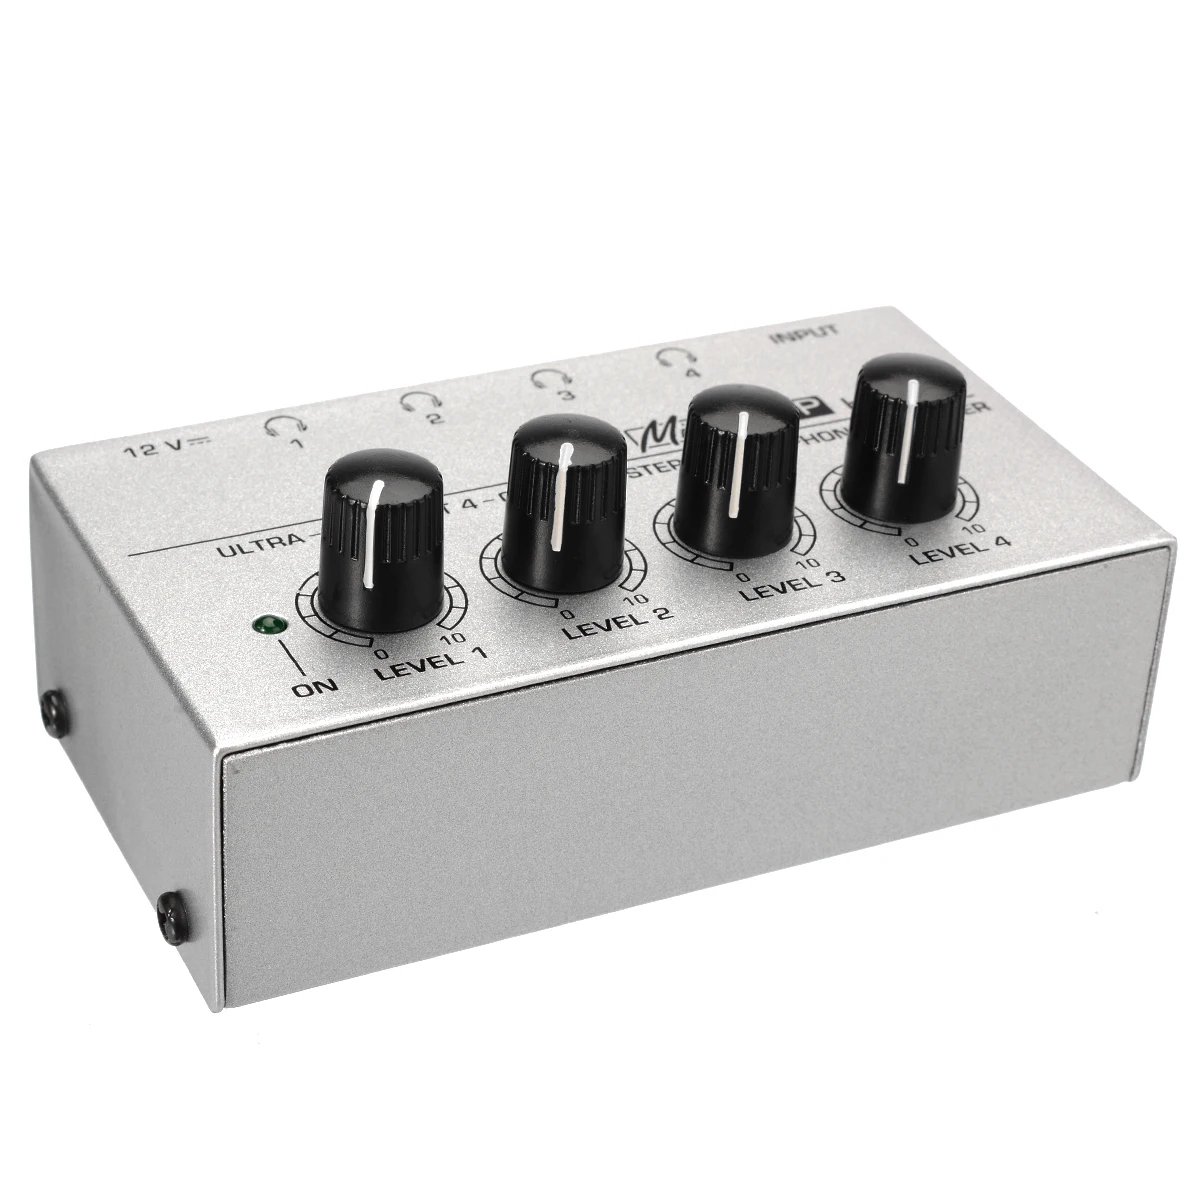 Choir Premium Sonic Quality Stage Features Ultra Low Noise Studio MK-400 Aokeo Super Compact 4-Channel Stereo Headphone Amplifier with DC 12V Power Adapter for Sound Reinforcement 